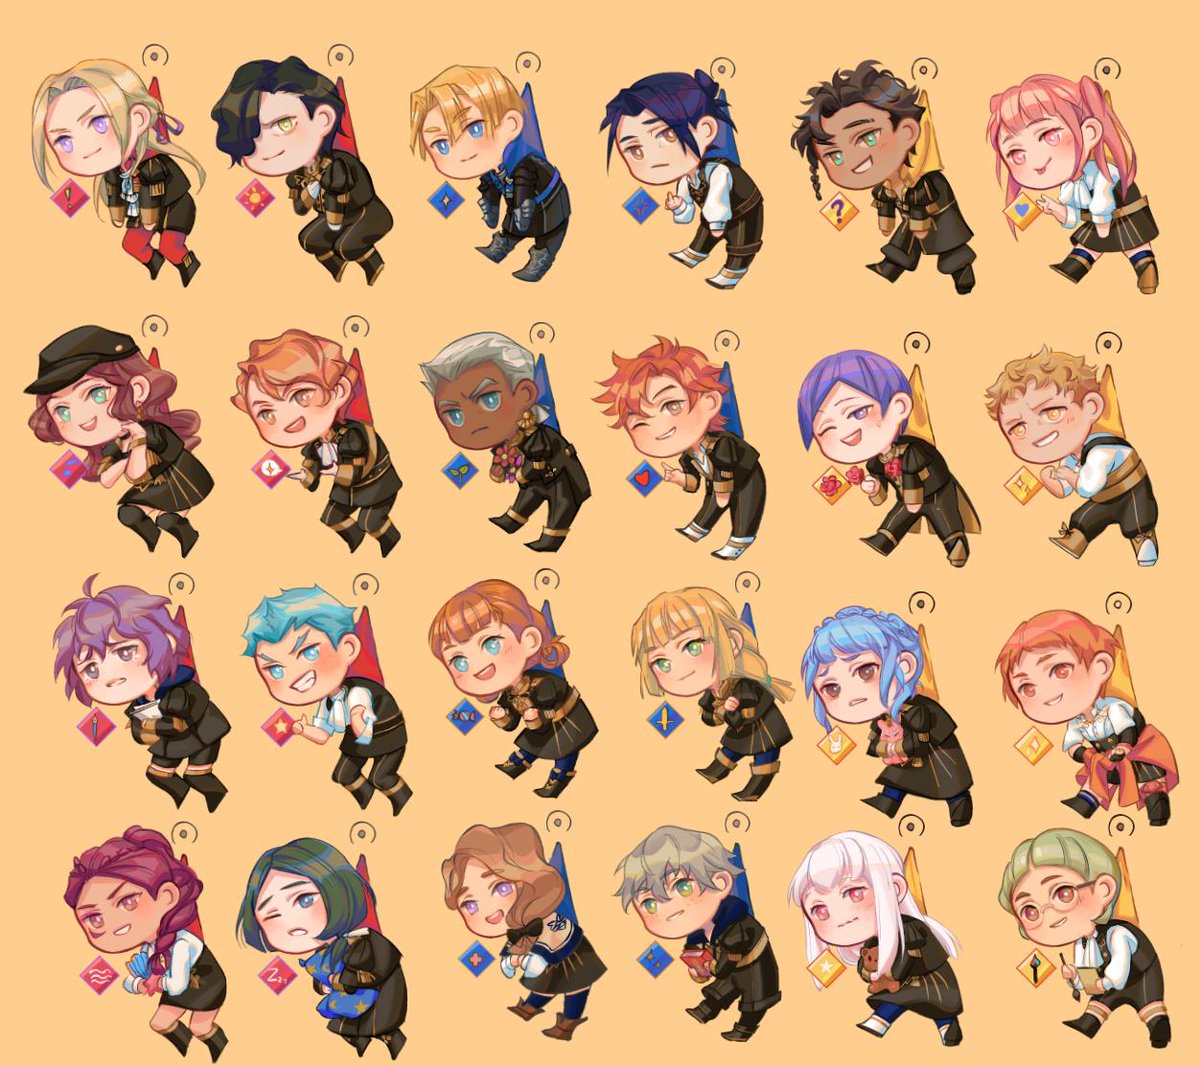 Hello!
My Byleth & linking students charms are up for pre-orders!
All students from the three houses are available 🦁🦅🦌
hanromi.bigcartel.com/product/preo-o…

[GIVE AWAY]
I'm giving a Byleth + student charm away! Just RT and comment your favorite student! 💕

Ends 25/08!
#FireEmblem3Houses